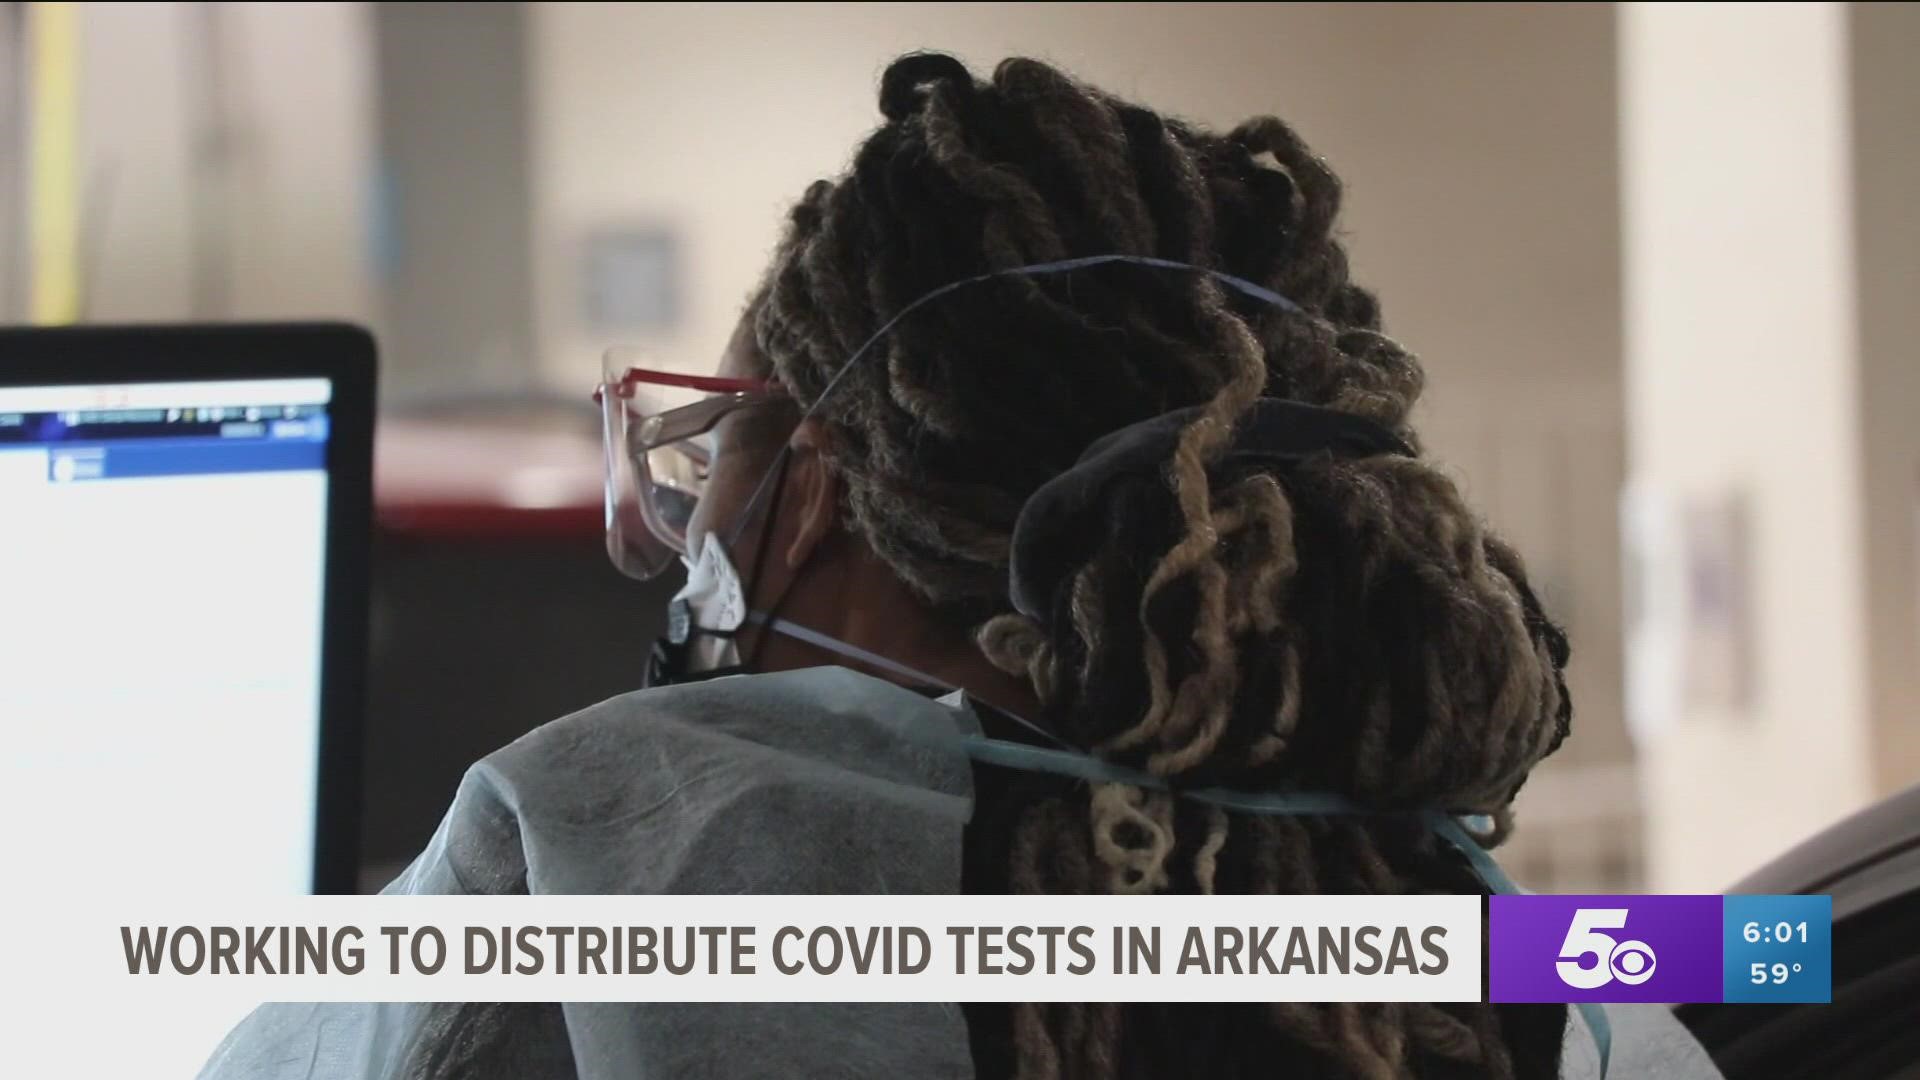 Arkansas reported nearly 5,000 new COVID-19 cases Thursday. Gov. Hutchinson says the state is working to get millions of at-home rapid tests to local health units.